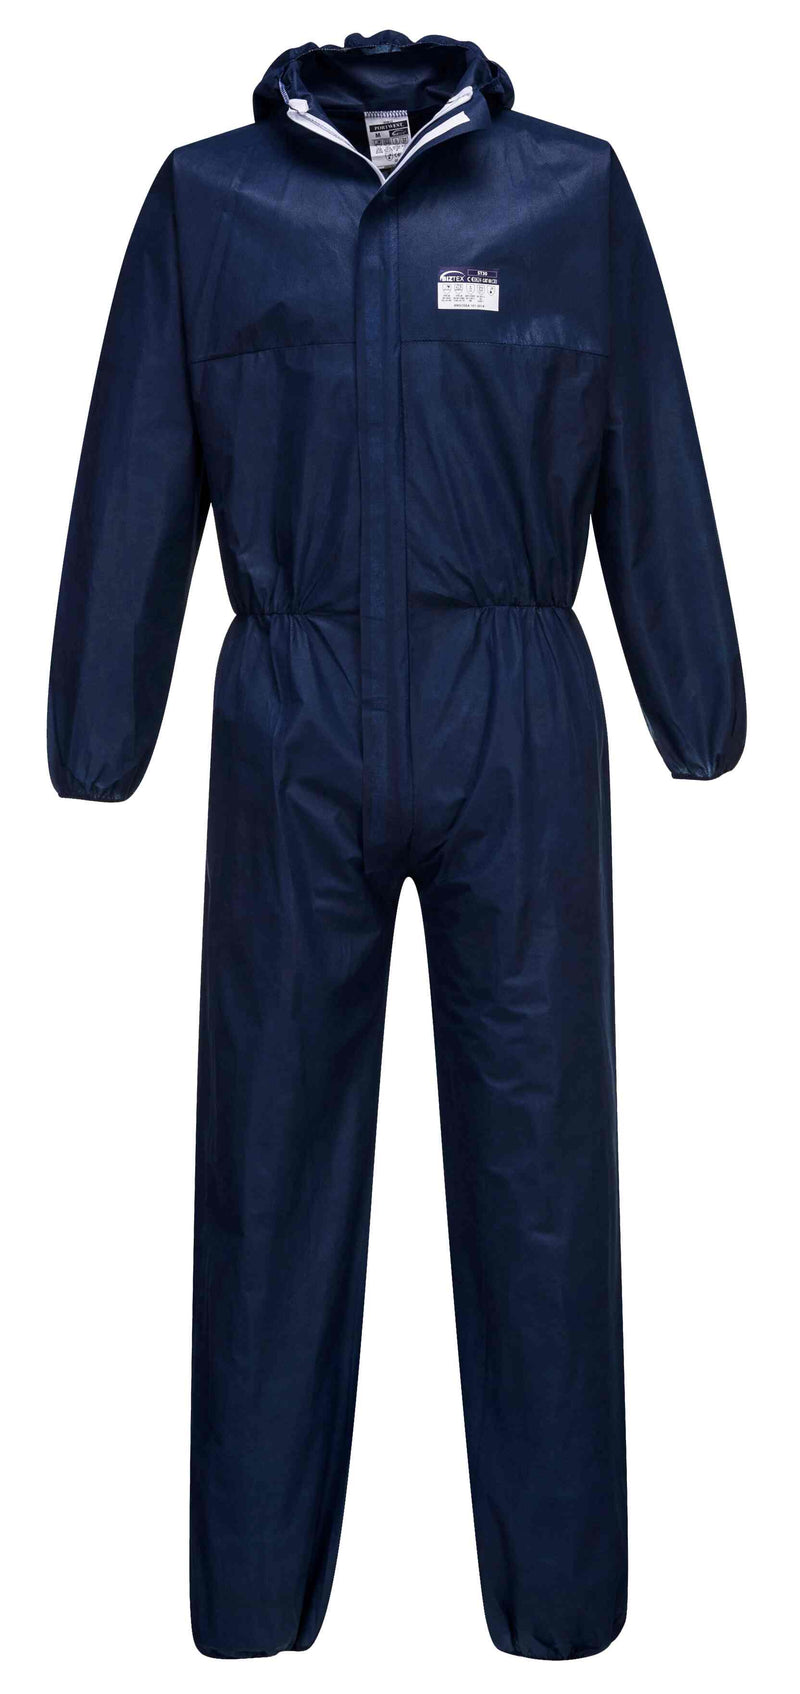 BizTex SMS Coverall Type 5/6 (Pk50)